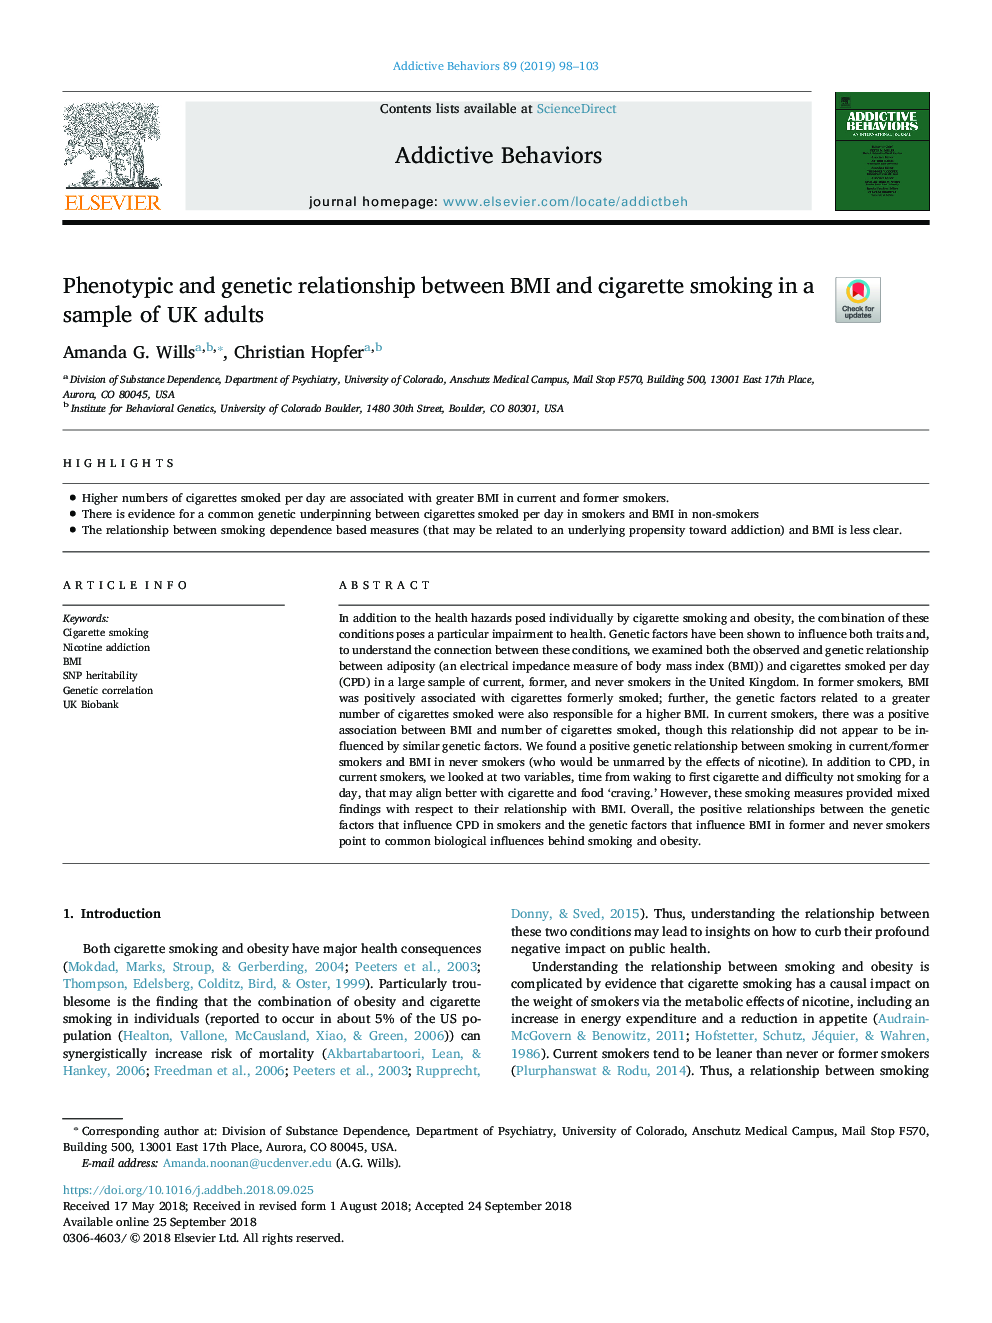 Phenotypic and genetic relationship between BMI and cigarette smoking in a sample of UK adults